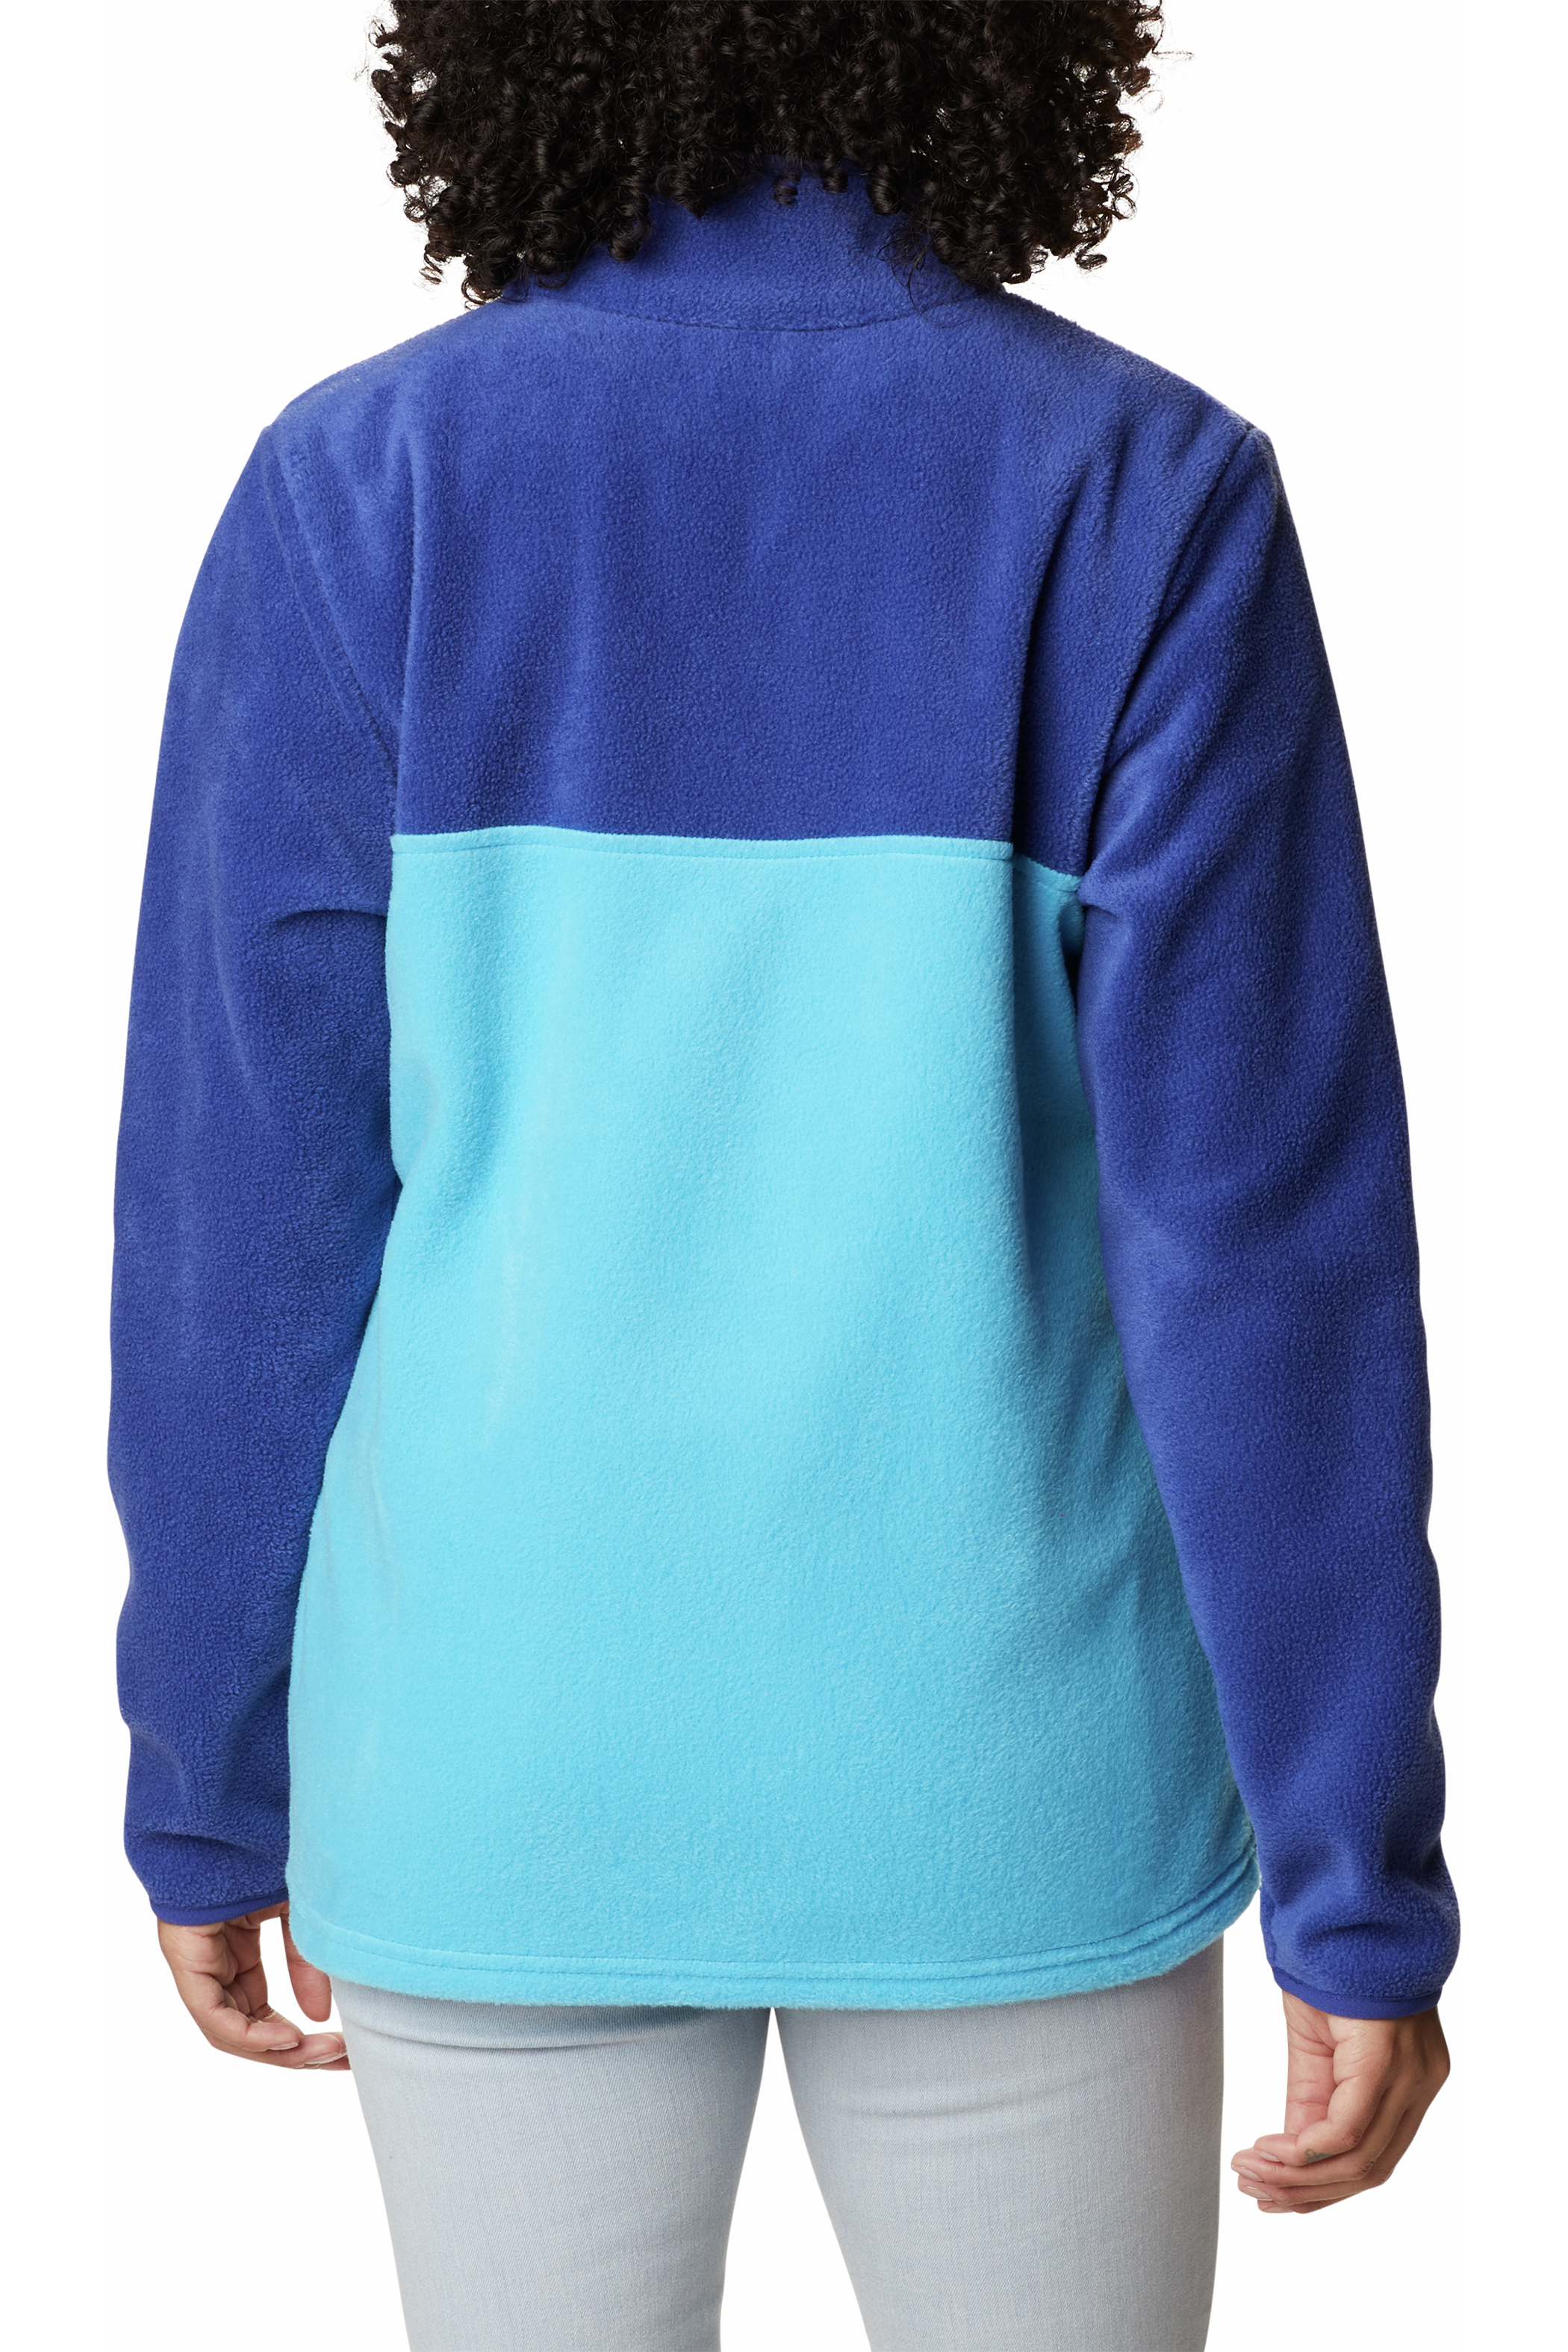 Columbia Benton Springs 1/2 Snap Pullover - Style 1860991422, back